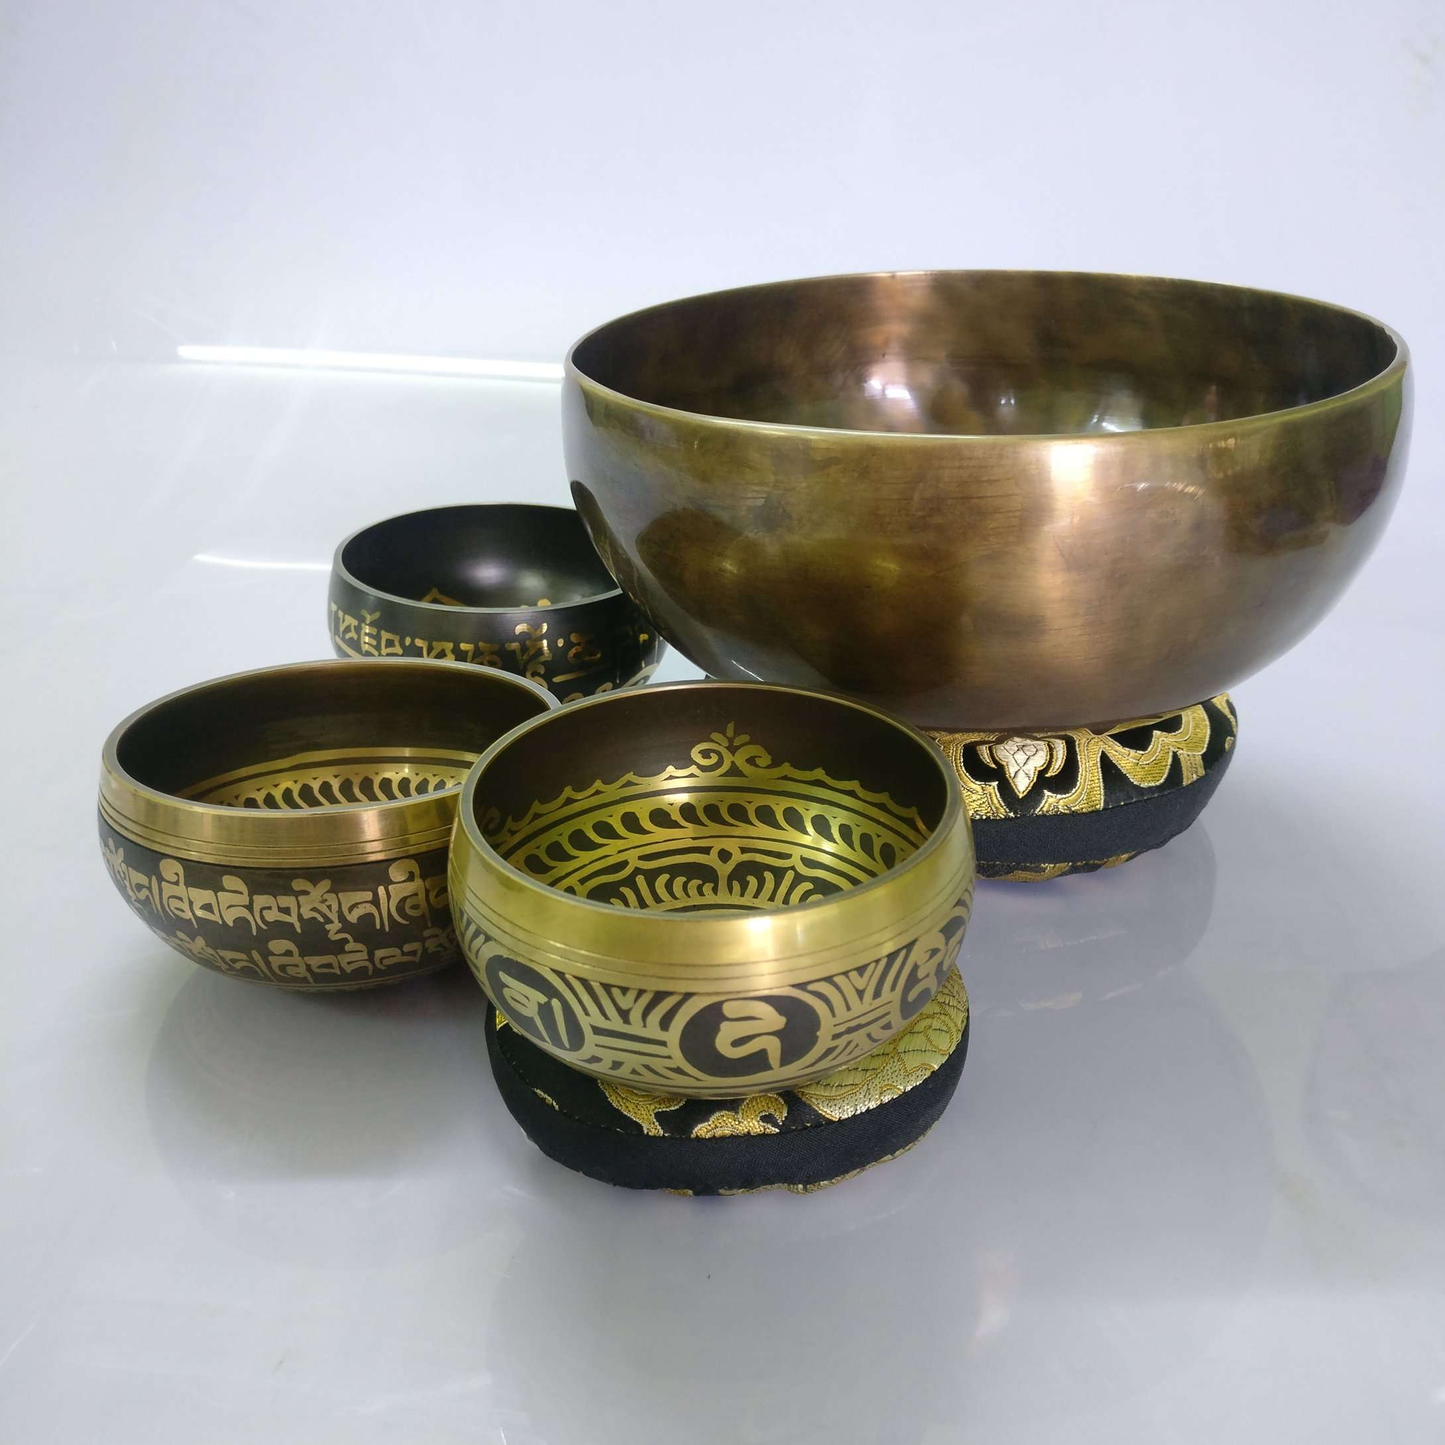 Which singing bowl should you buy? Silent Mind’s Top Singing Bowl Picks for 2022